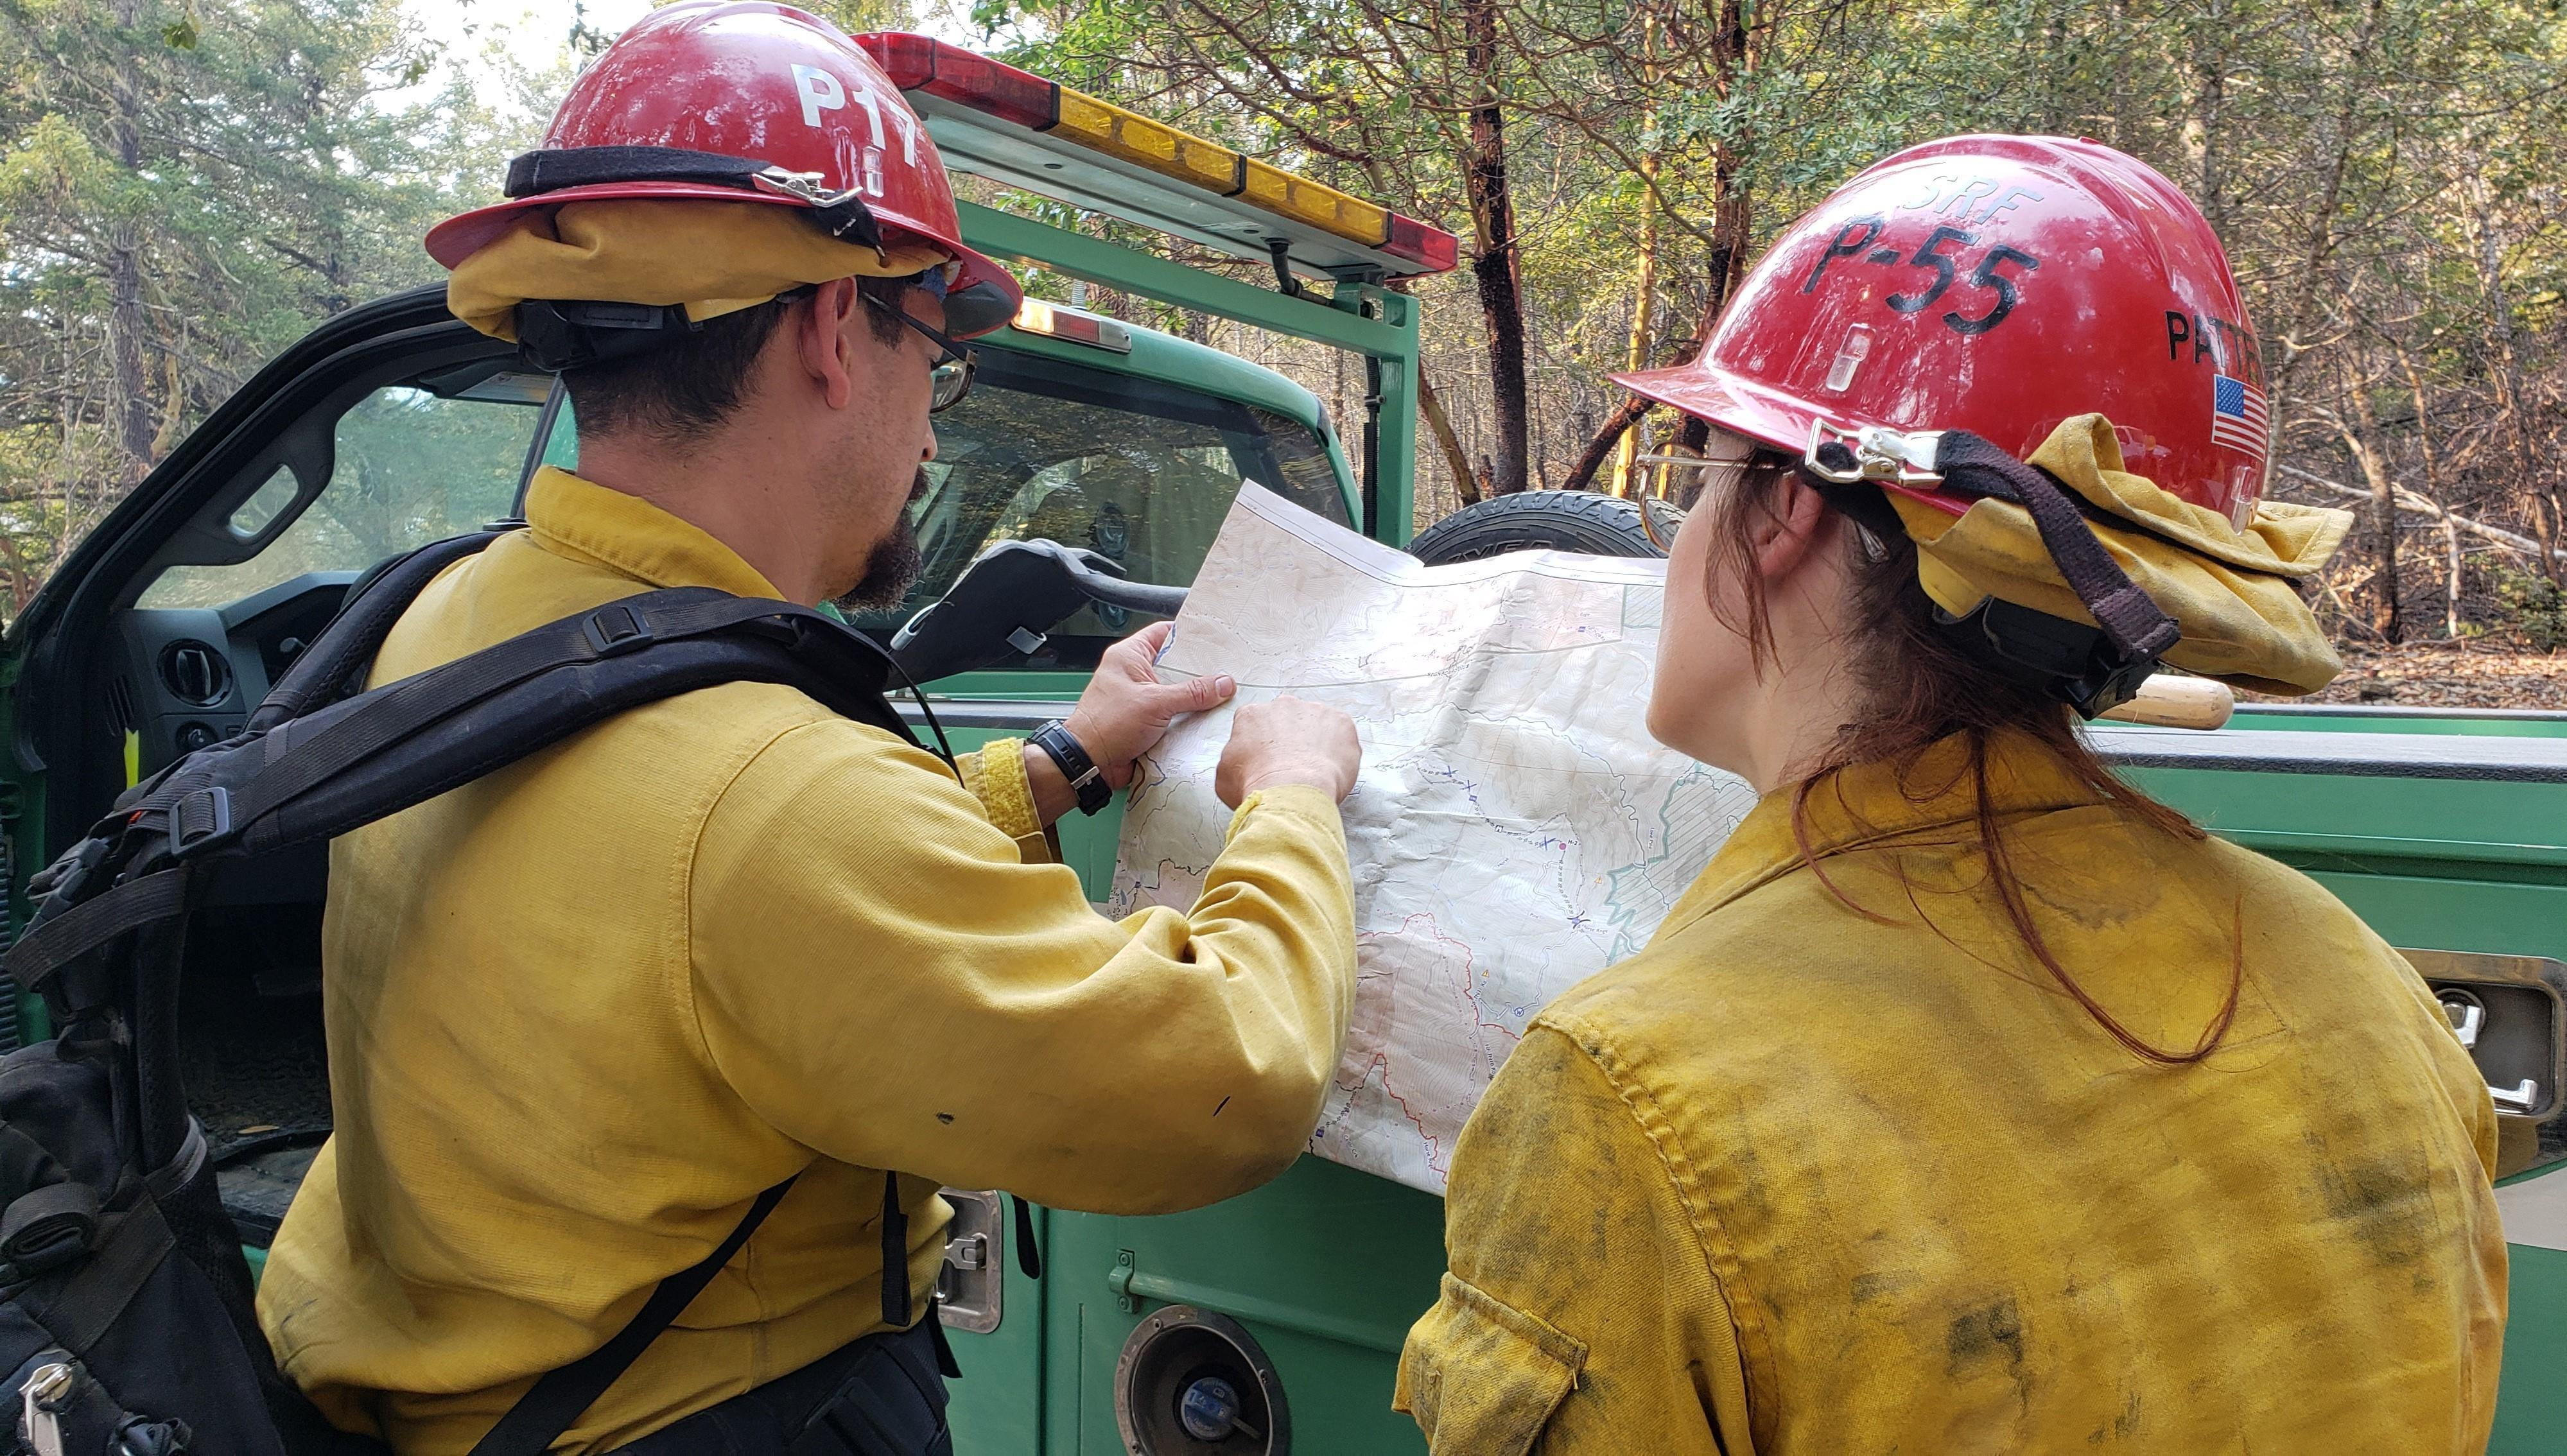 Two firefighters in wildland gear and red helmets study a map against a green truck